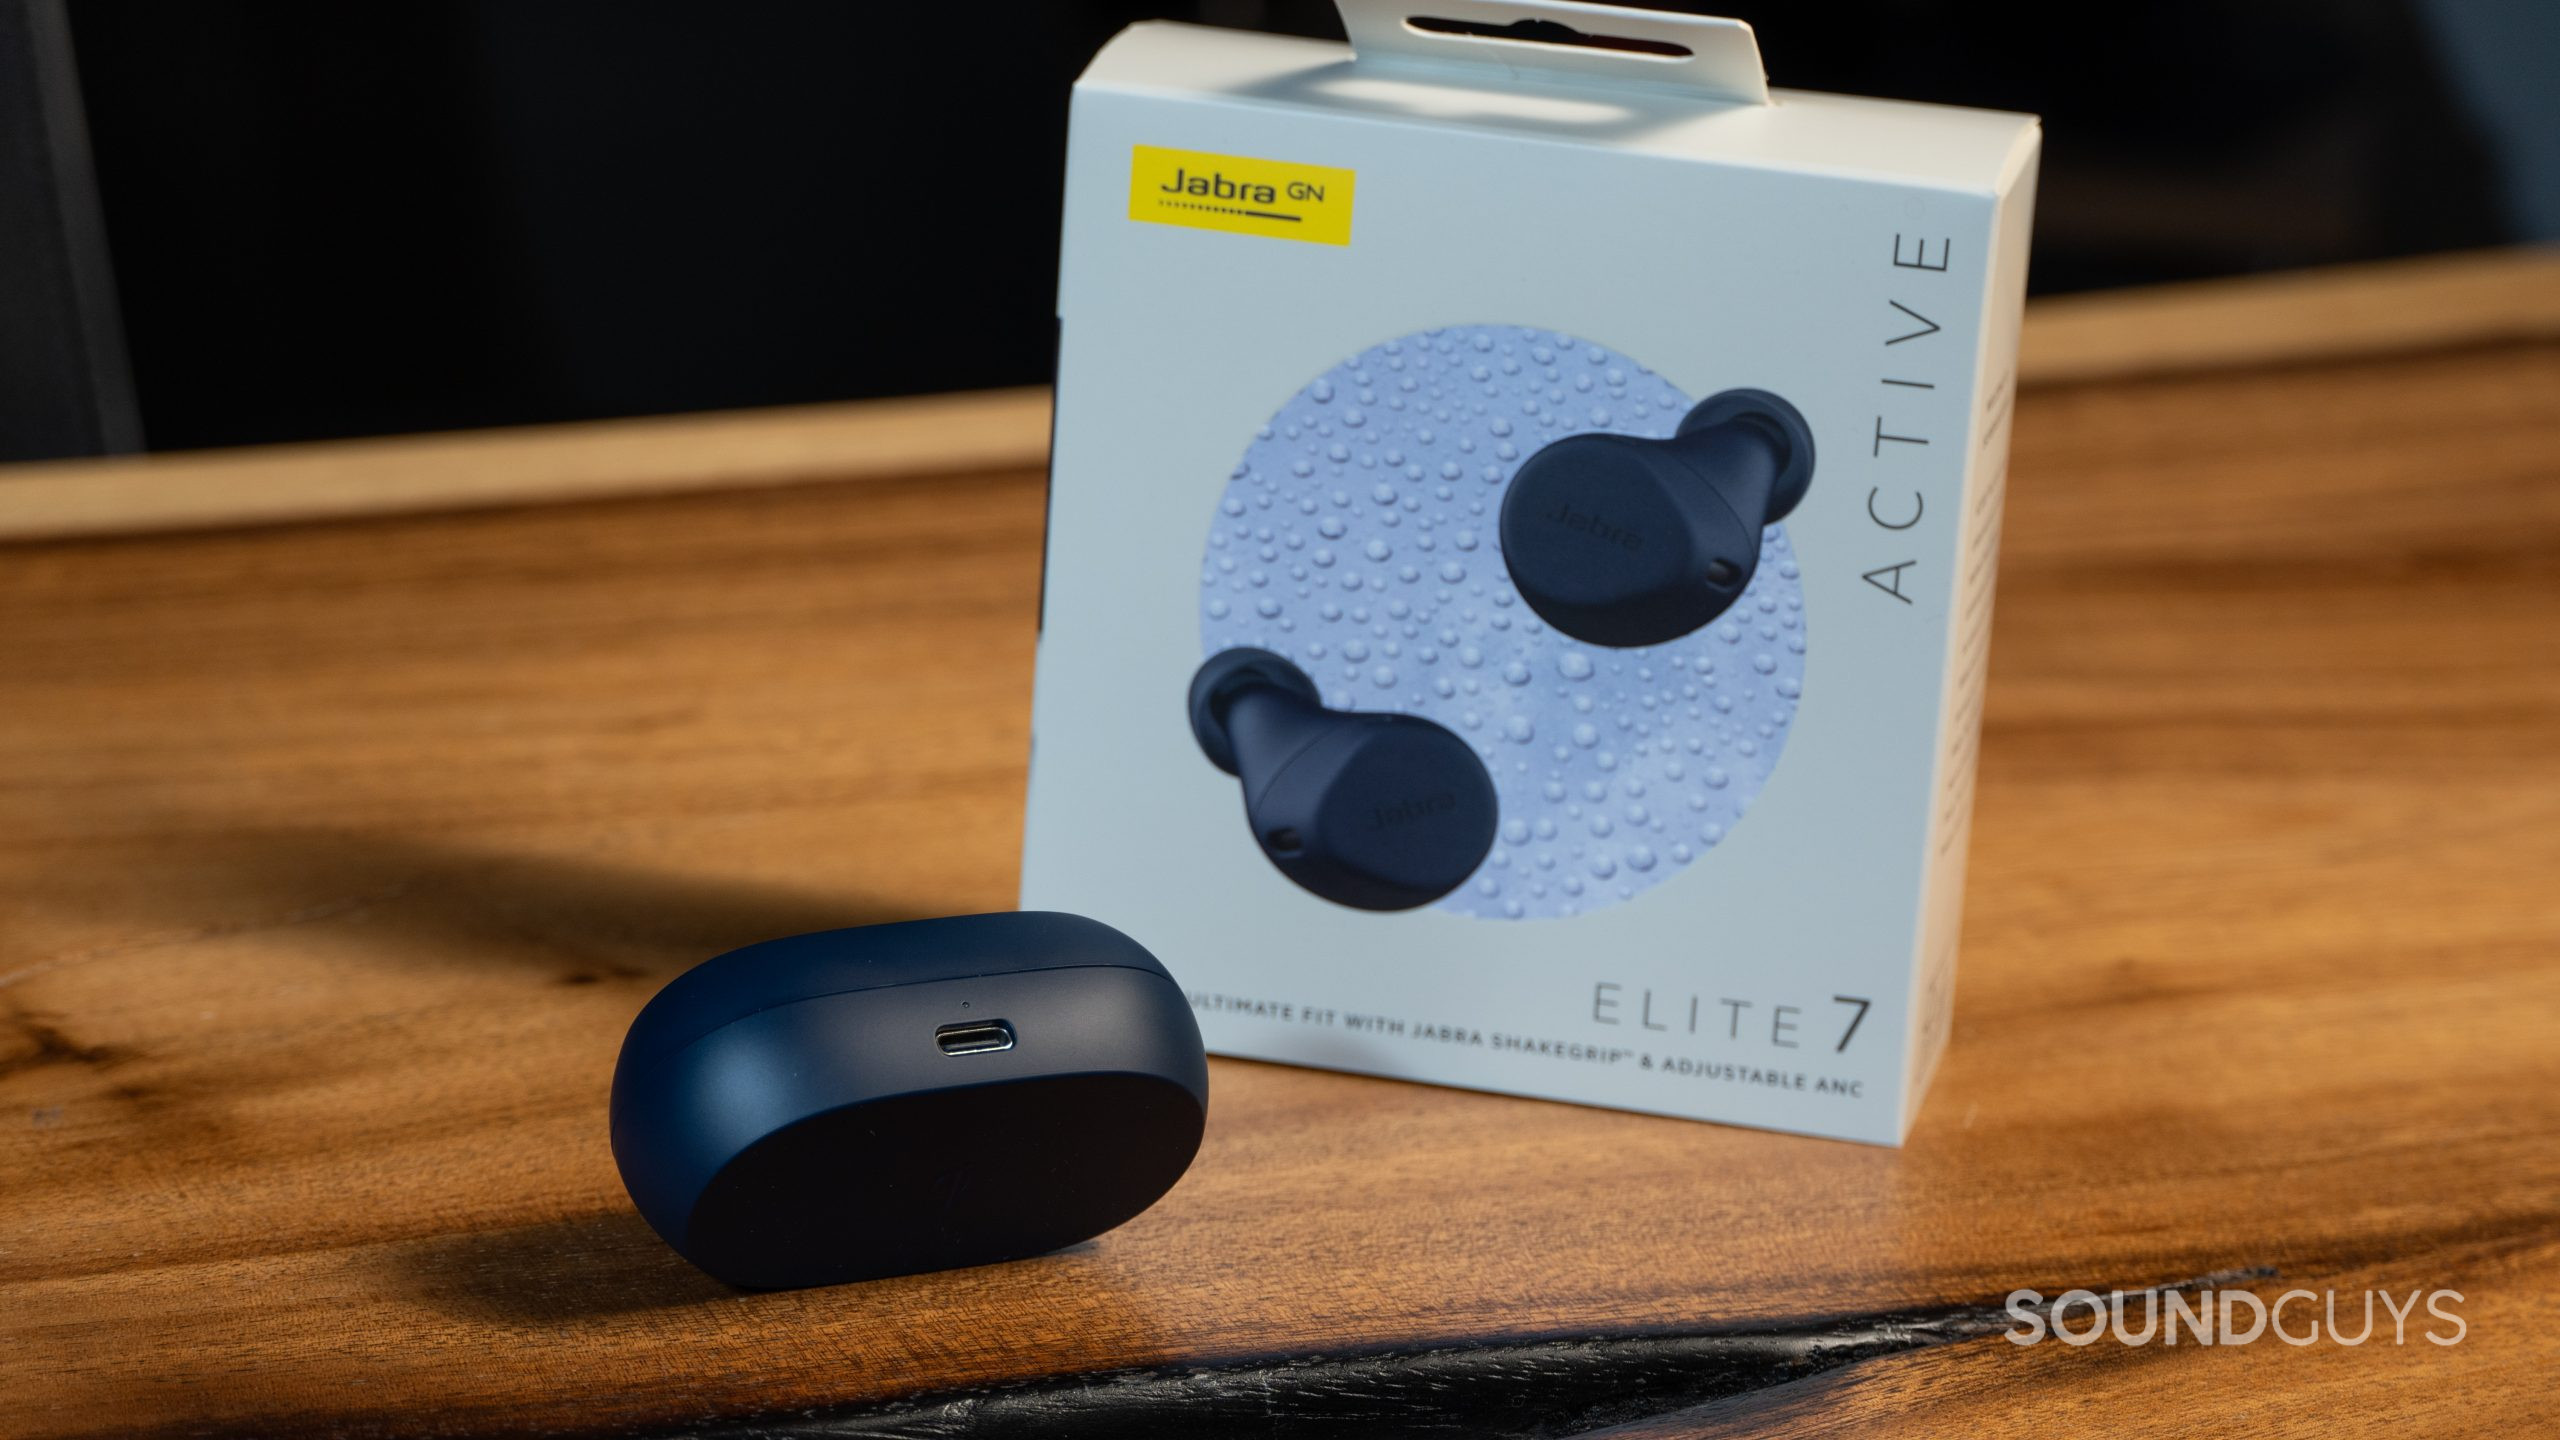 Jabra Elite 7 Active charging case on wood table next to product box.